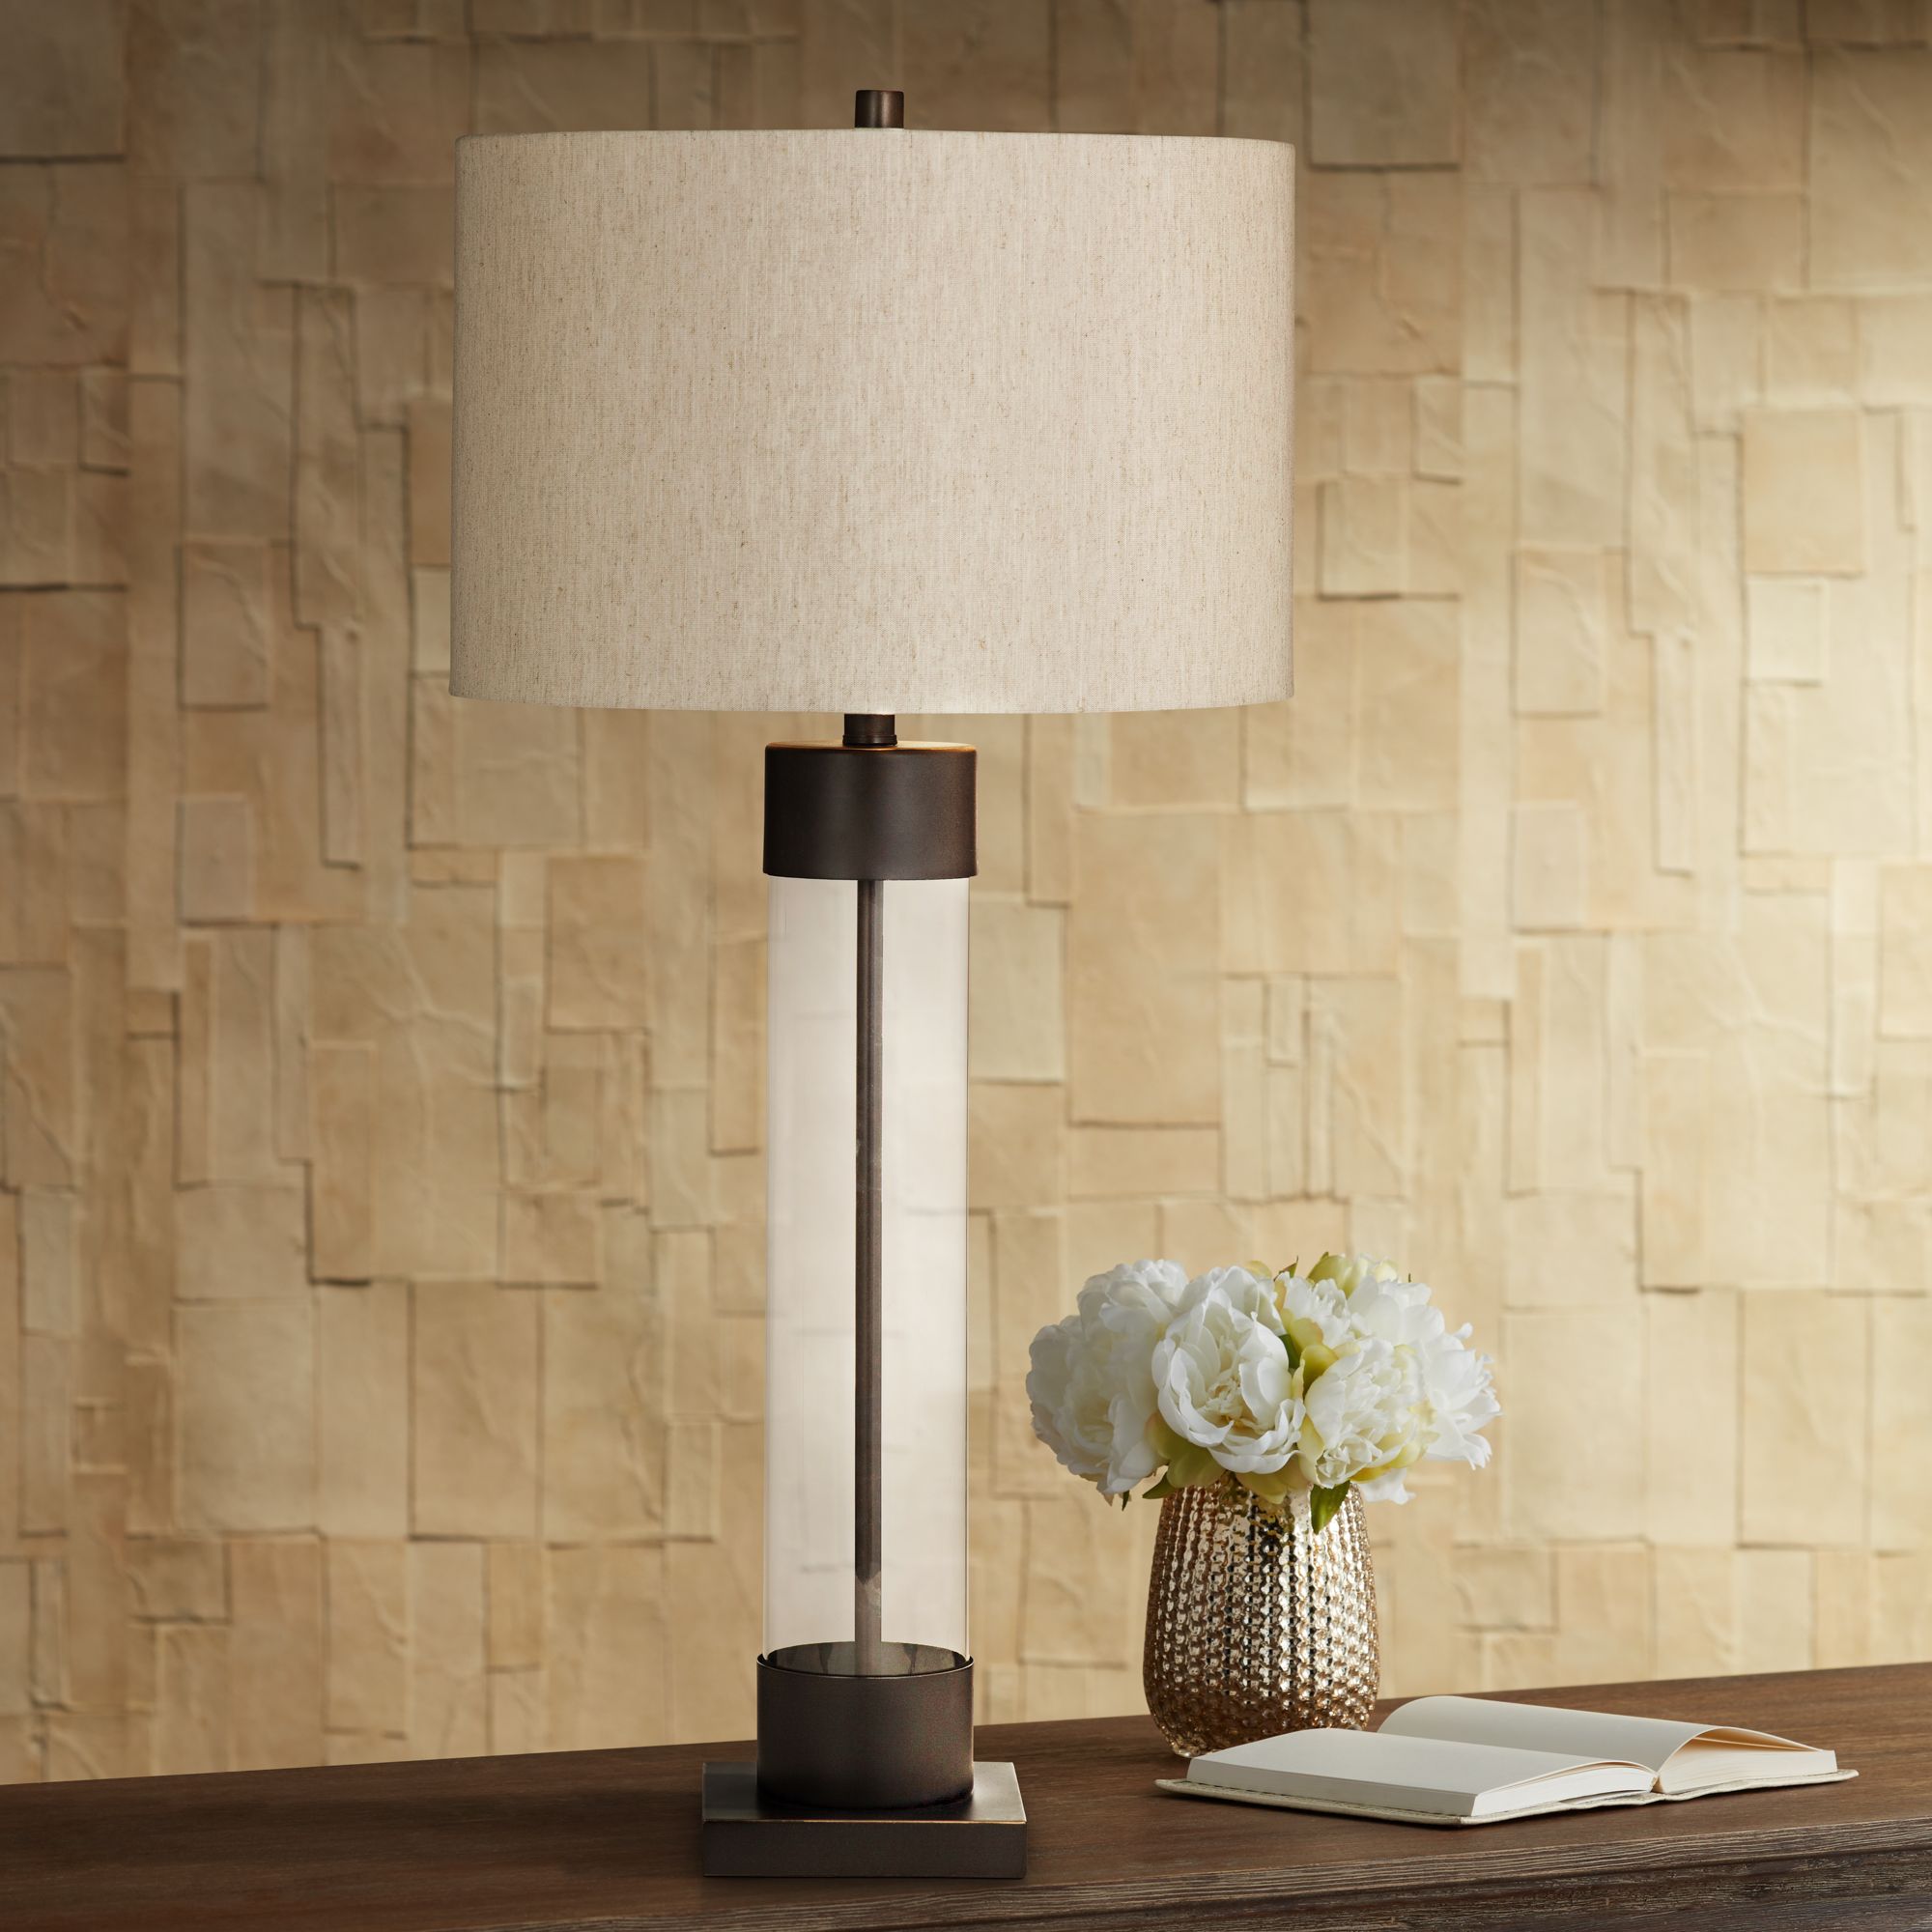 bronze and glass table lamps